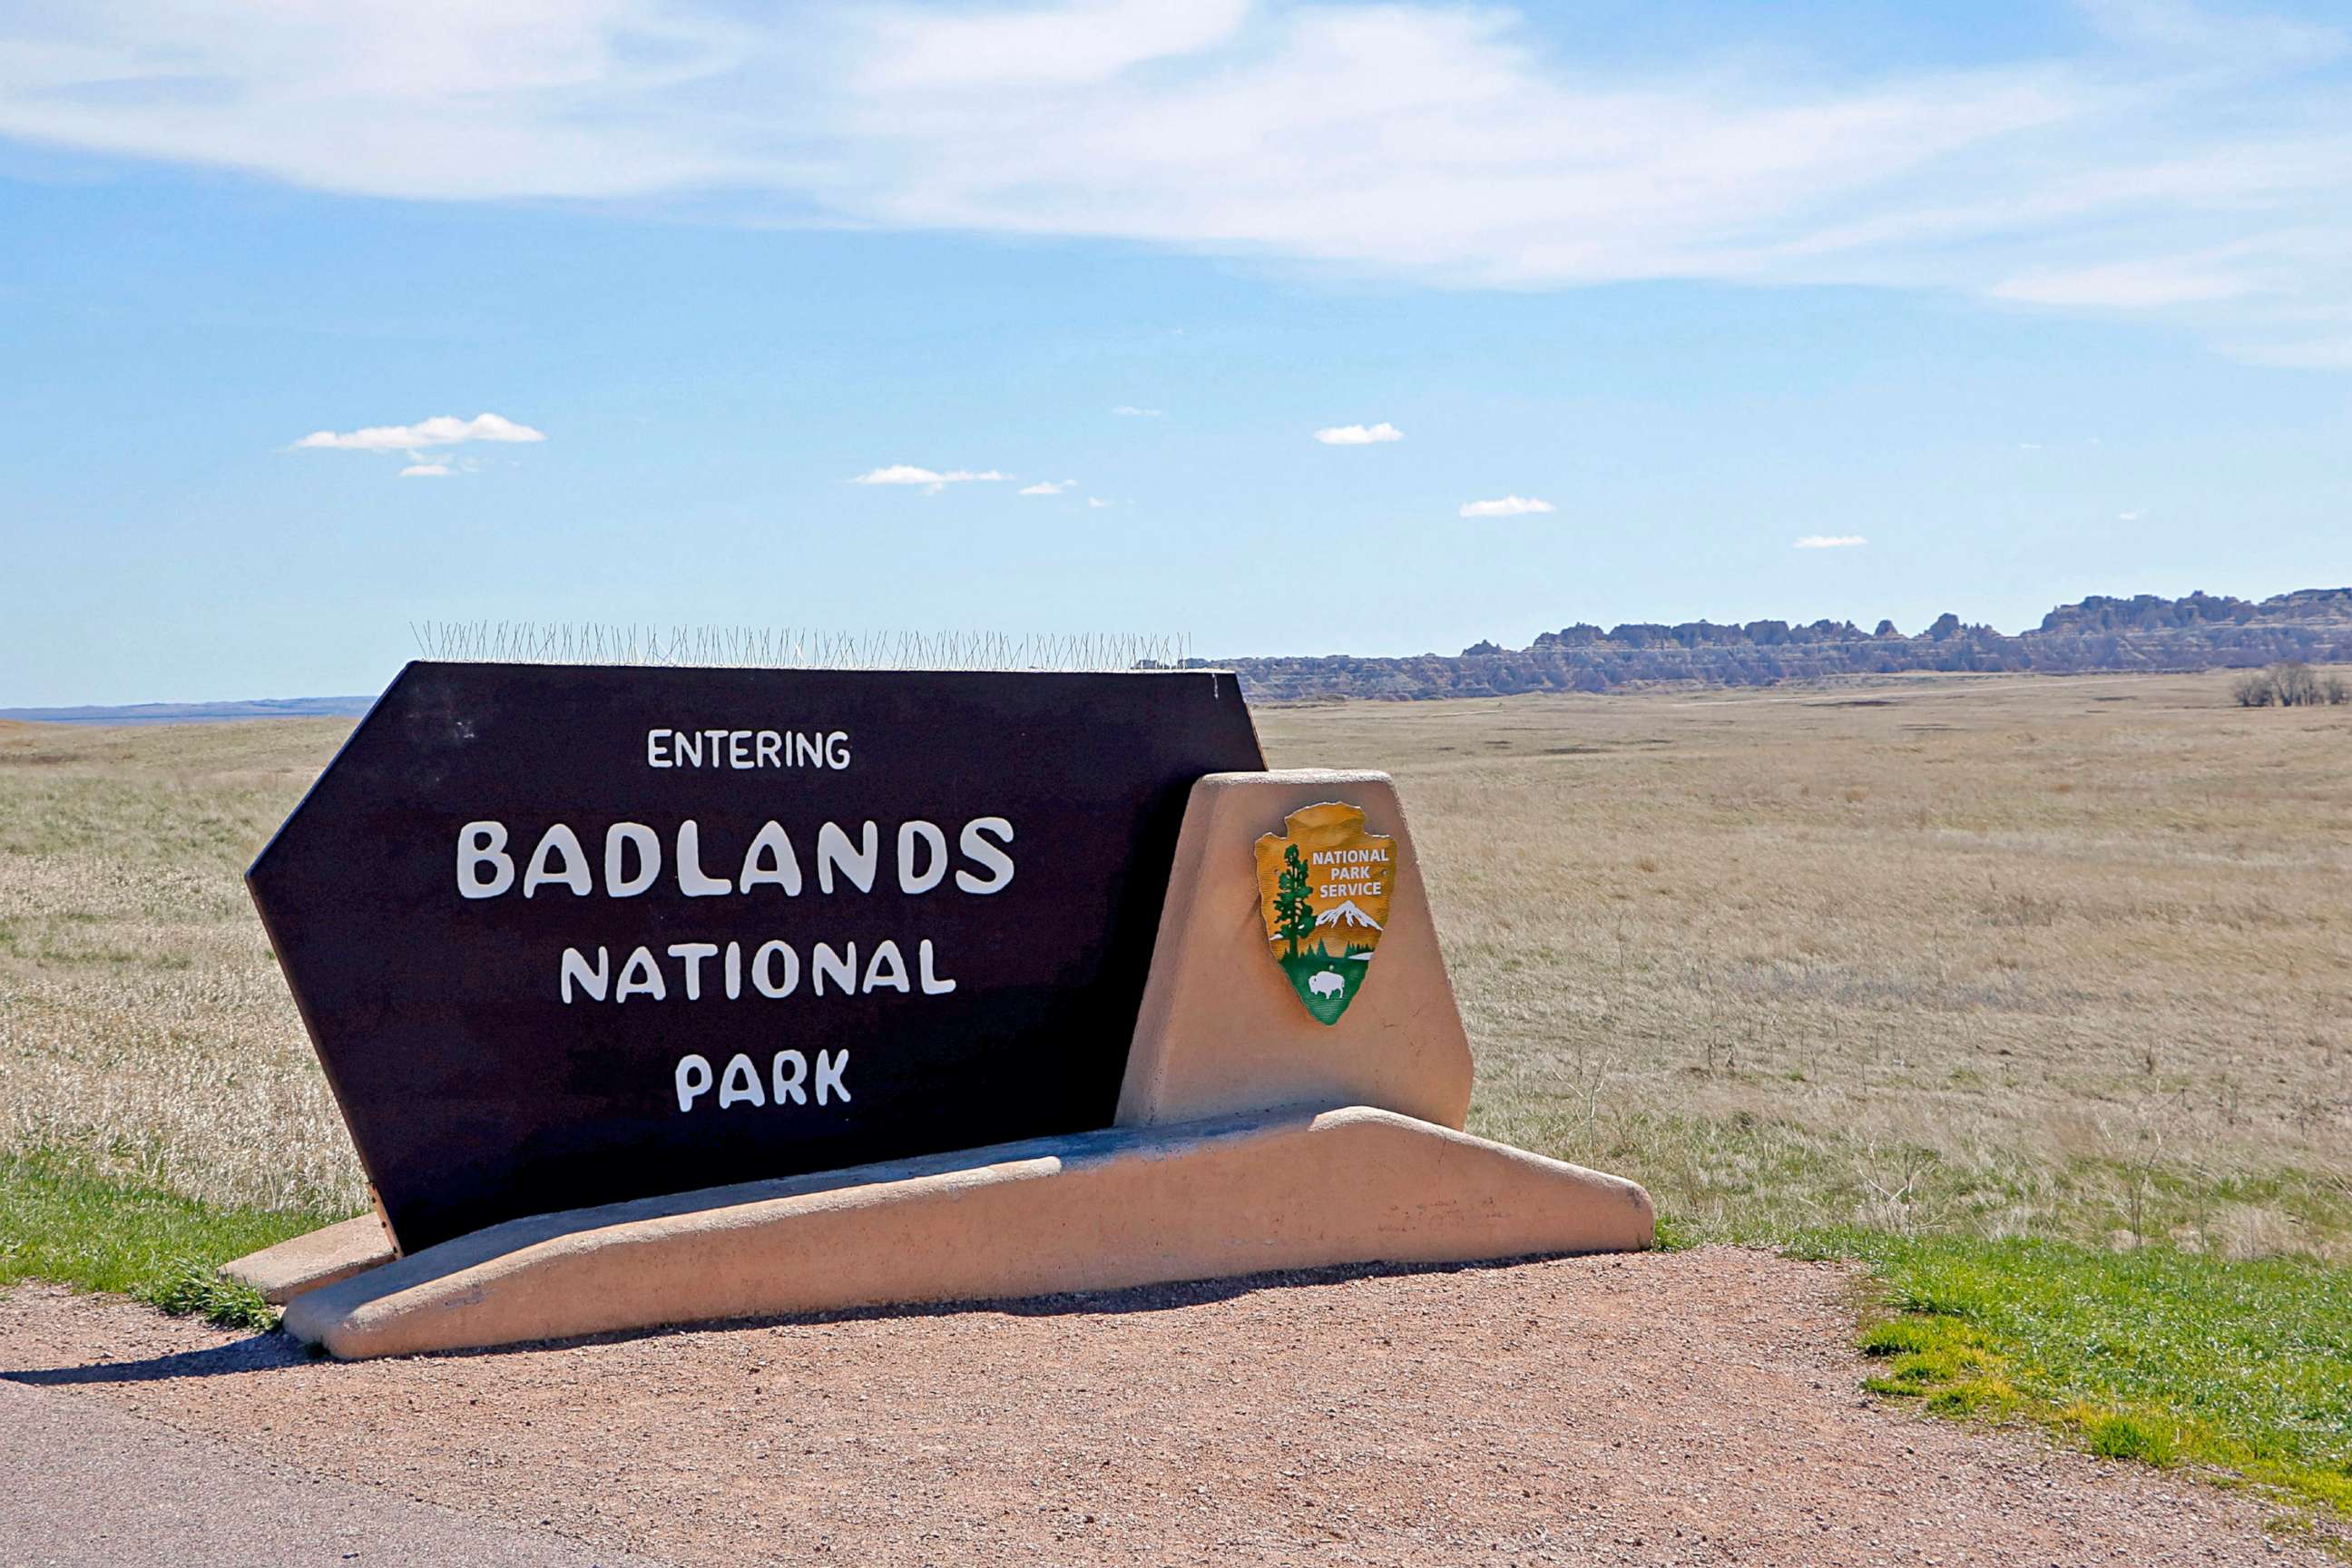 PHOTO: A sign indicates the entrance to Badlands National Park in South Dakota.